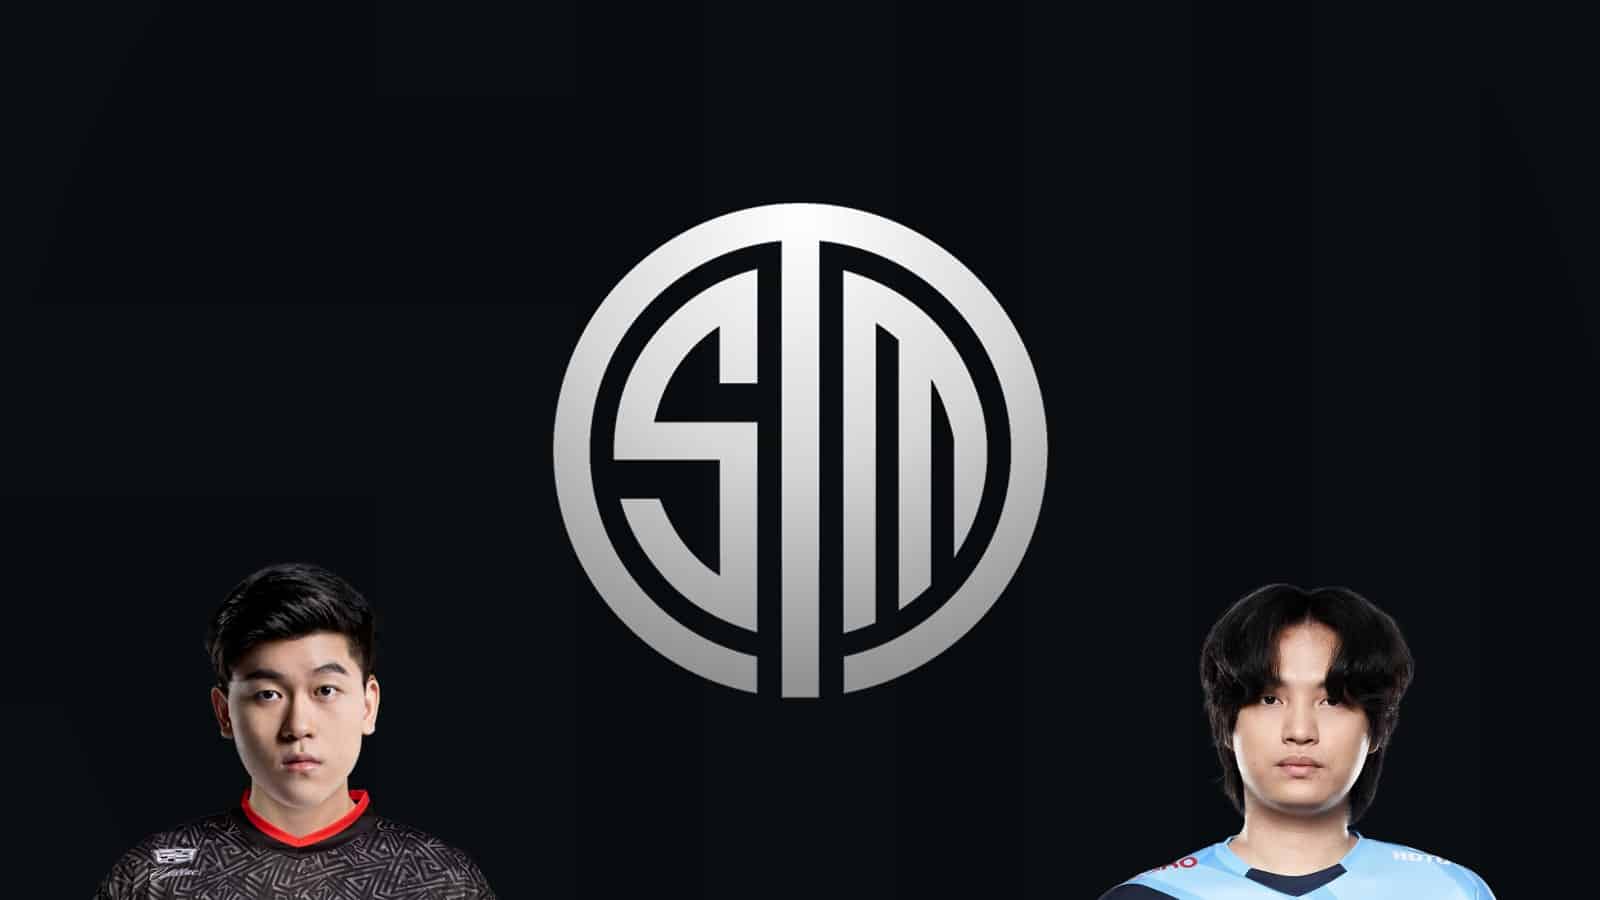 TSM logo with images of players Yursan and Fly